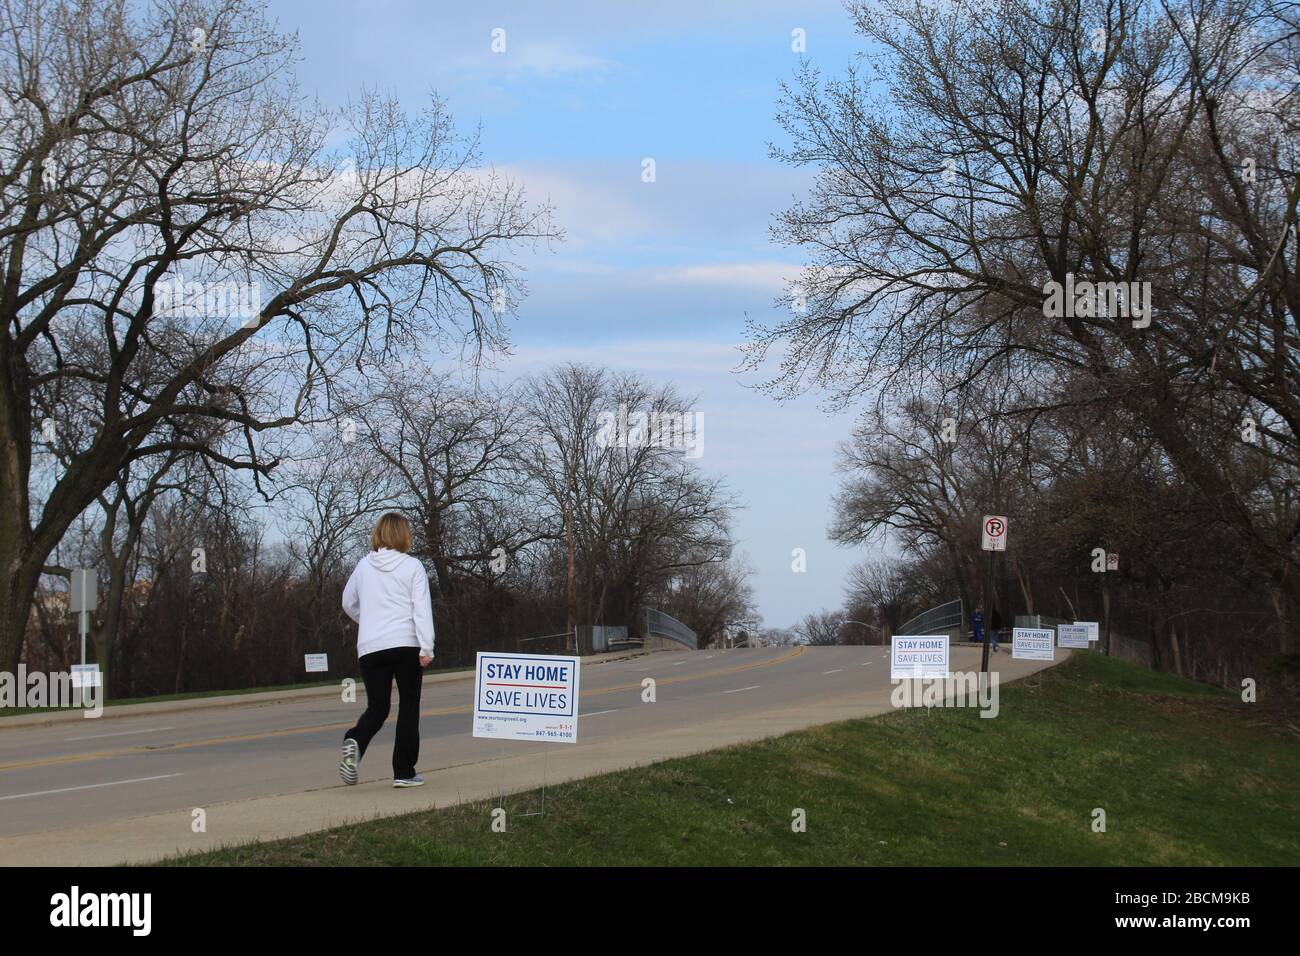 Woman walking uphill towards Stay Home Stay Lives signs during coronavirus pandemic shelter-in-place order Stock Photo